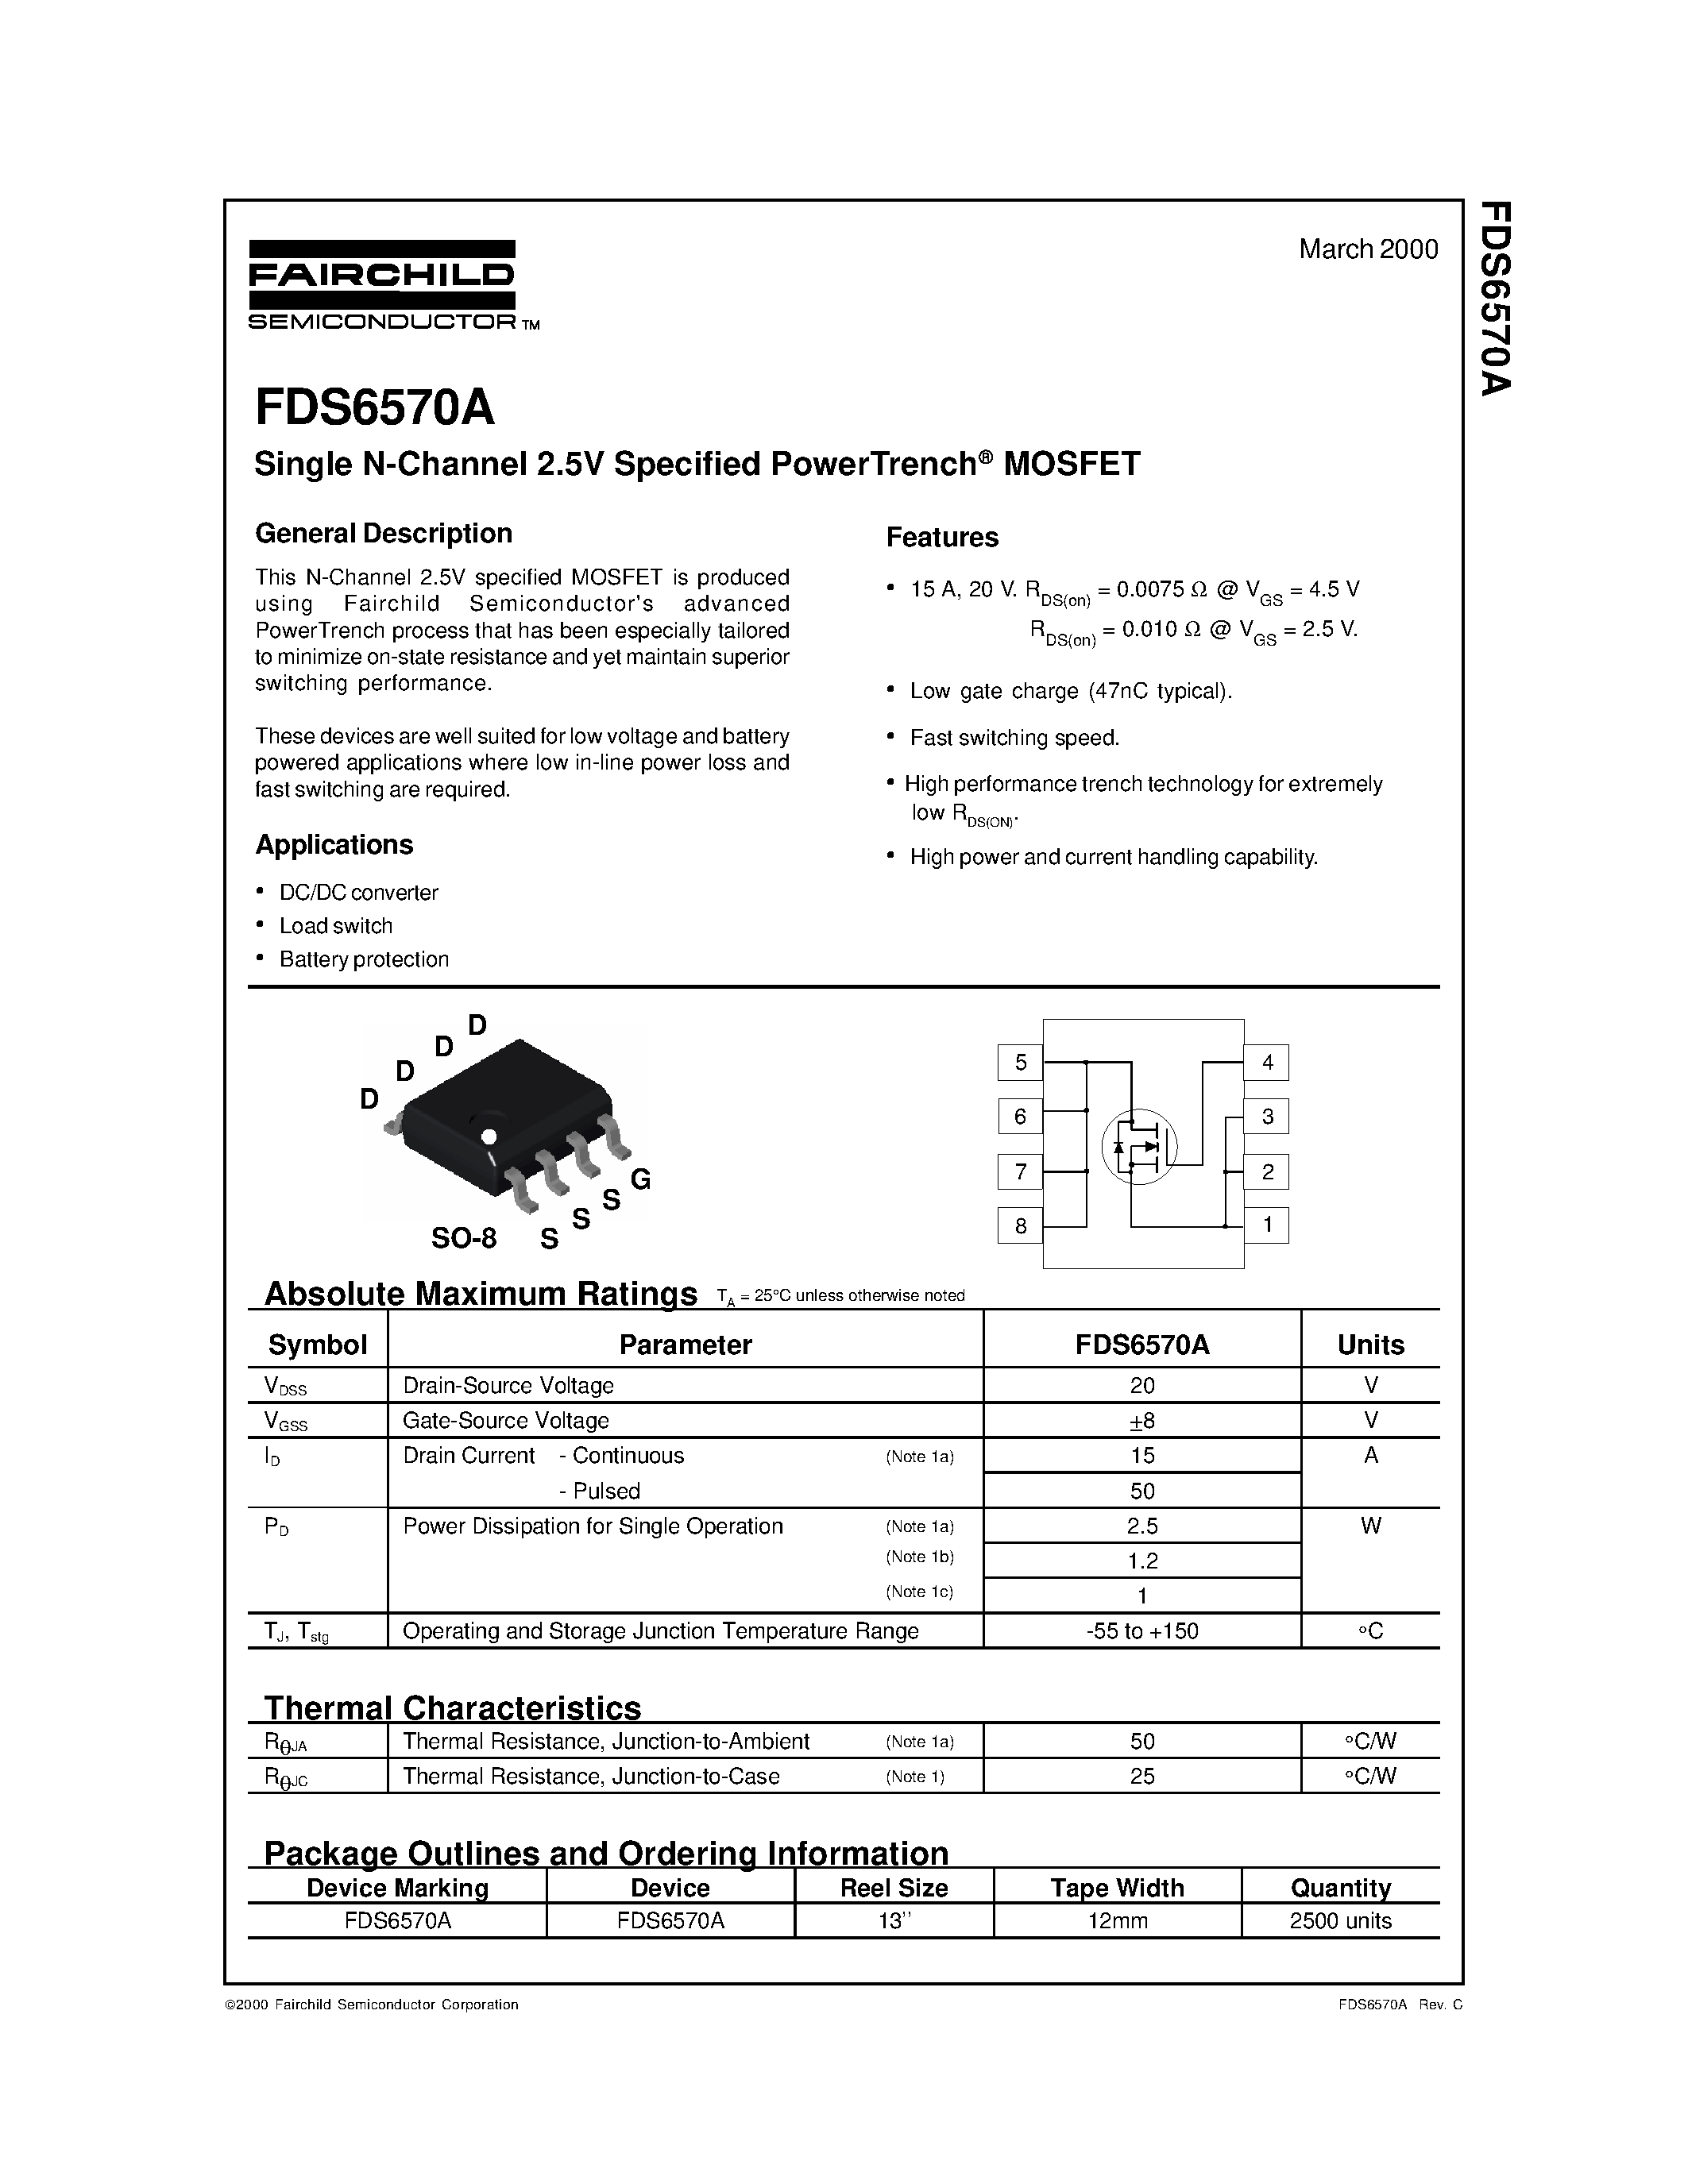 Datasheet FDS6570A - Single N-Channel 2.5V Specified PowerTrench MOSFET page 1